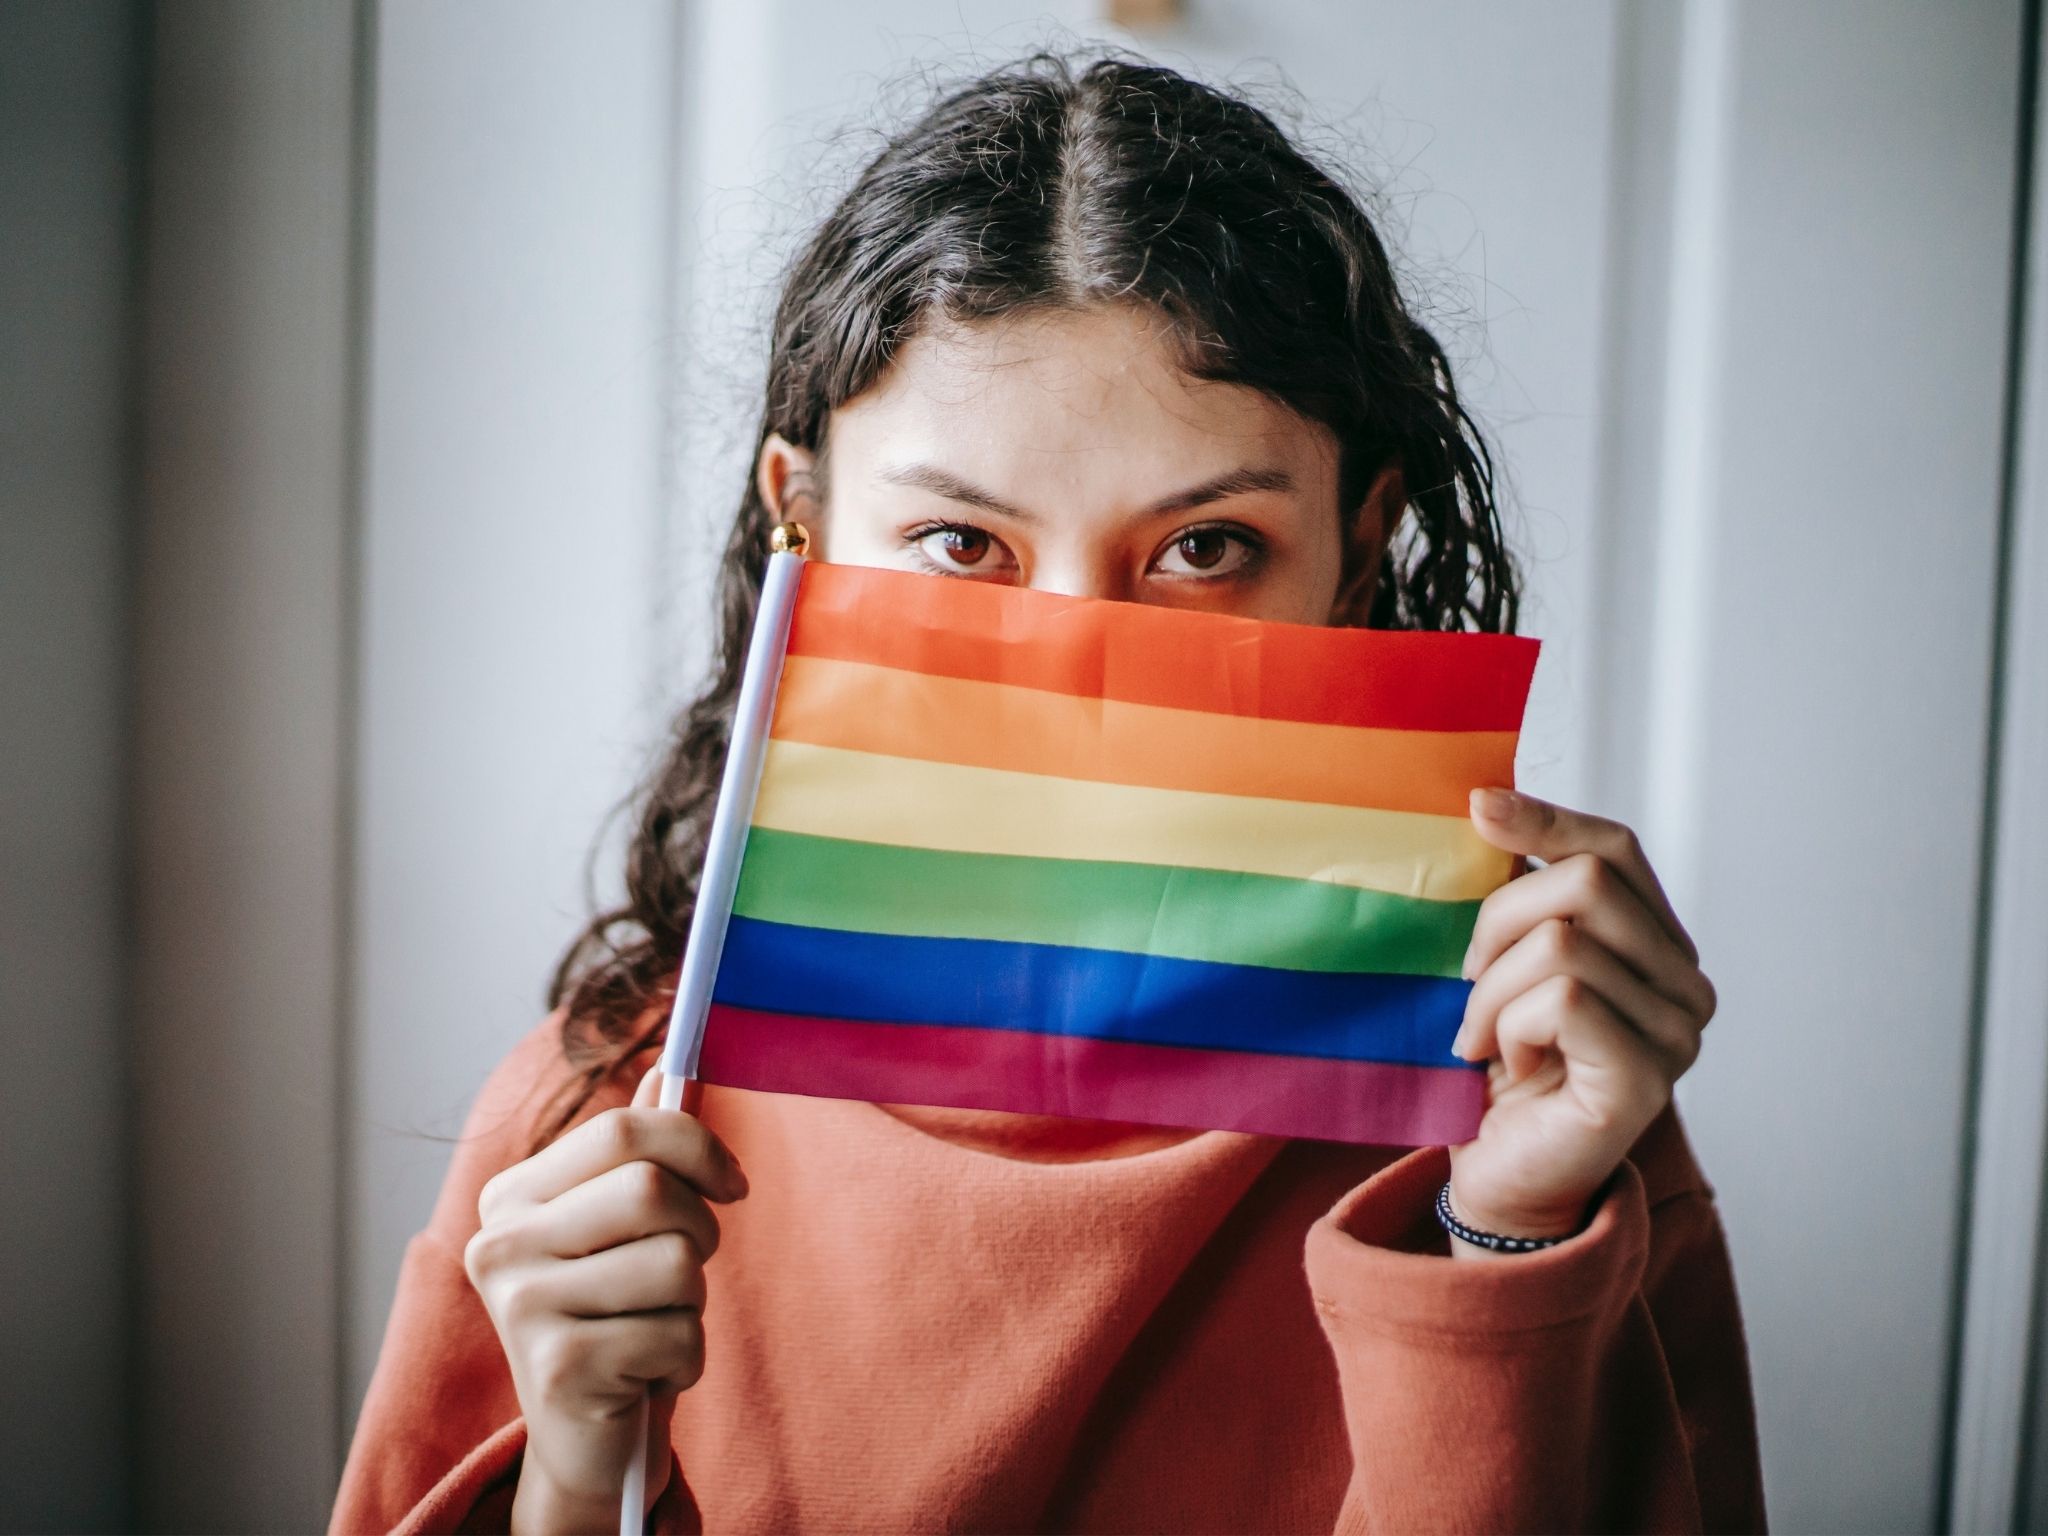 Young woman looking at the camera, holding a pride flag which obscures the rest of her face.